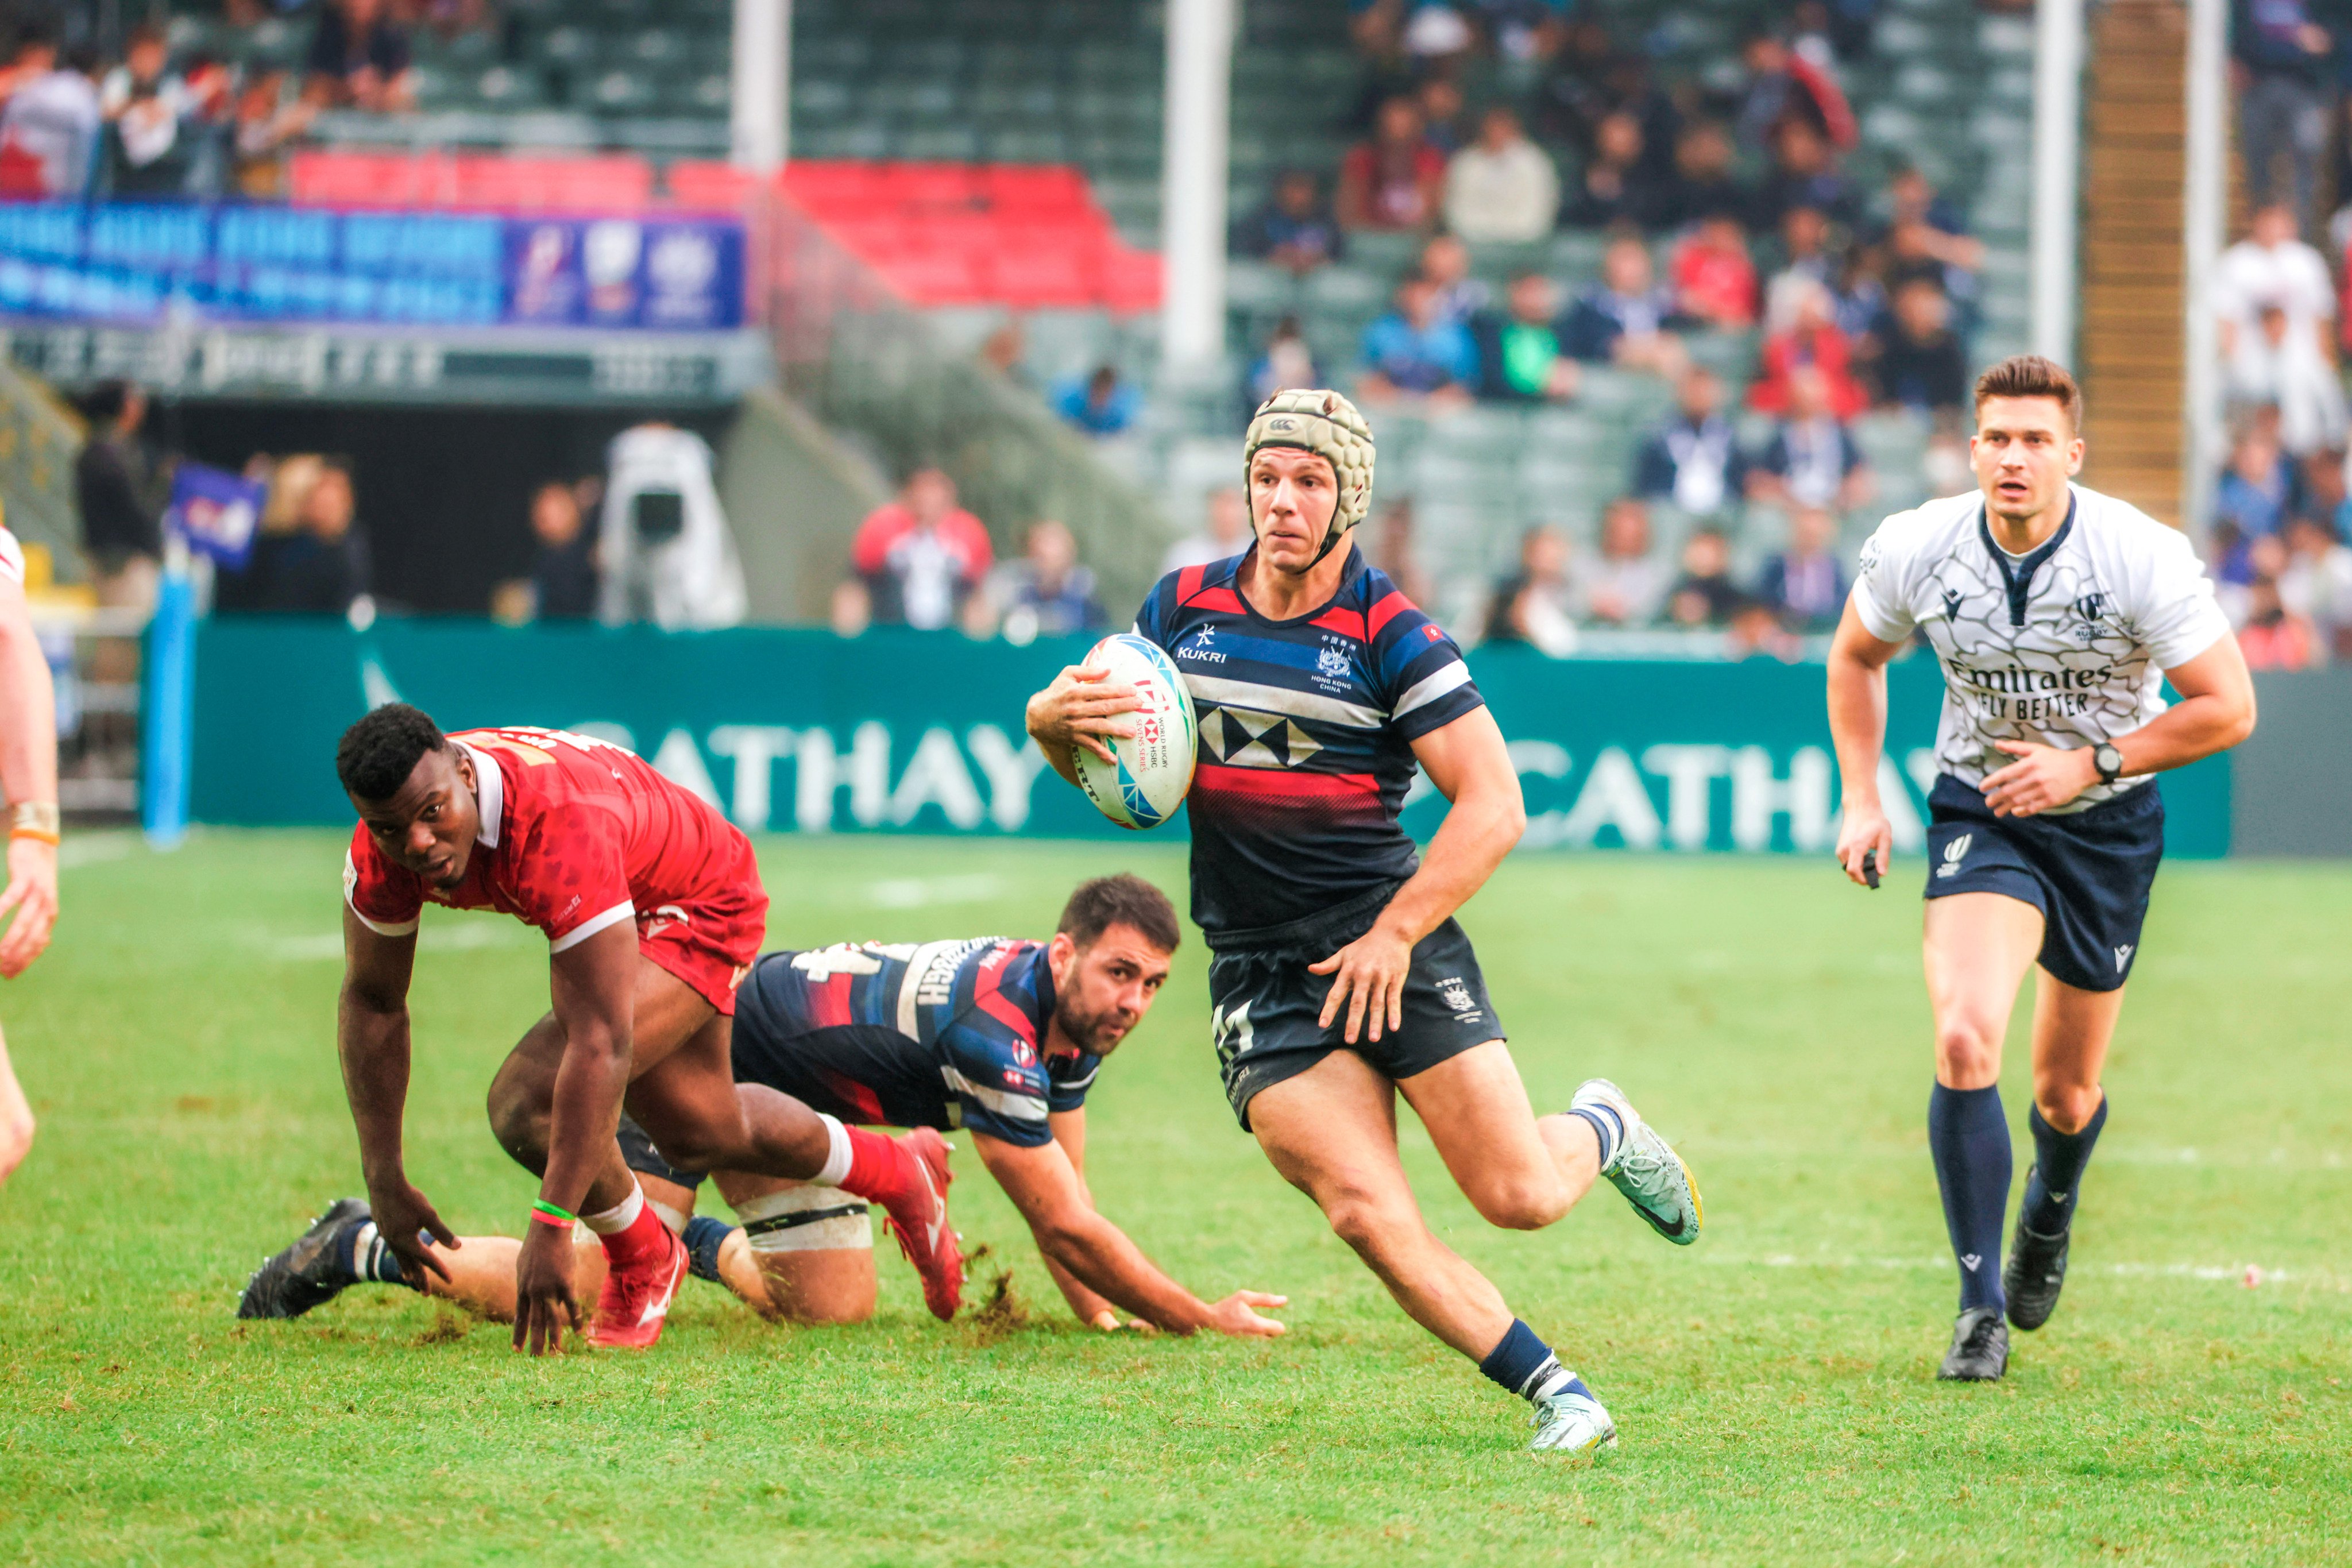 The fast-paced action, as well as the party atmosphere in the stands, are expected to draw thousands of spectators from around the world to this year’s Hong Kong Sevens. 
